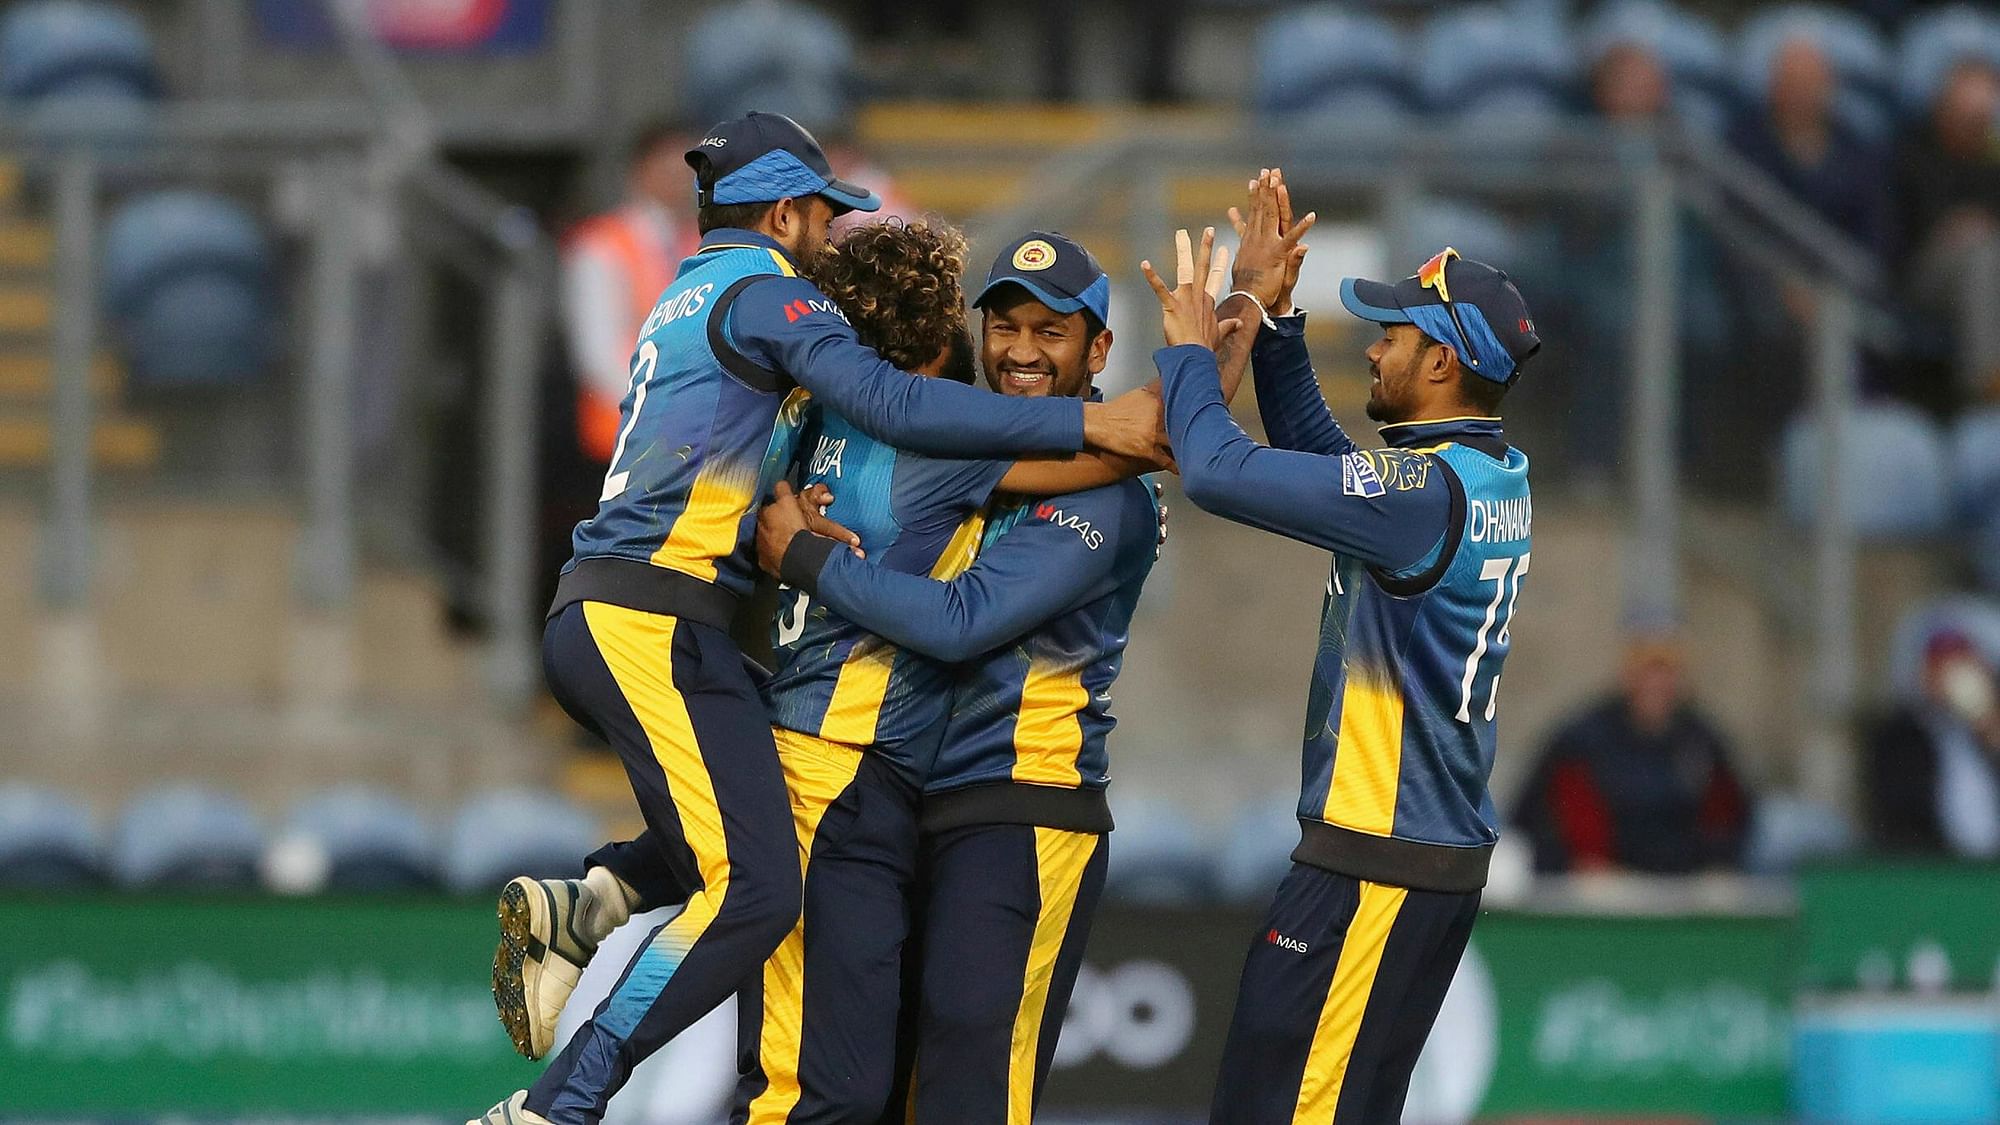 Sri Lanka celebrate their victory over Afghanistan, during the Cricket World Cup group stage match in Cardiff.&nbsp;